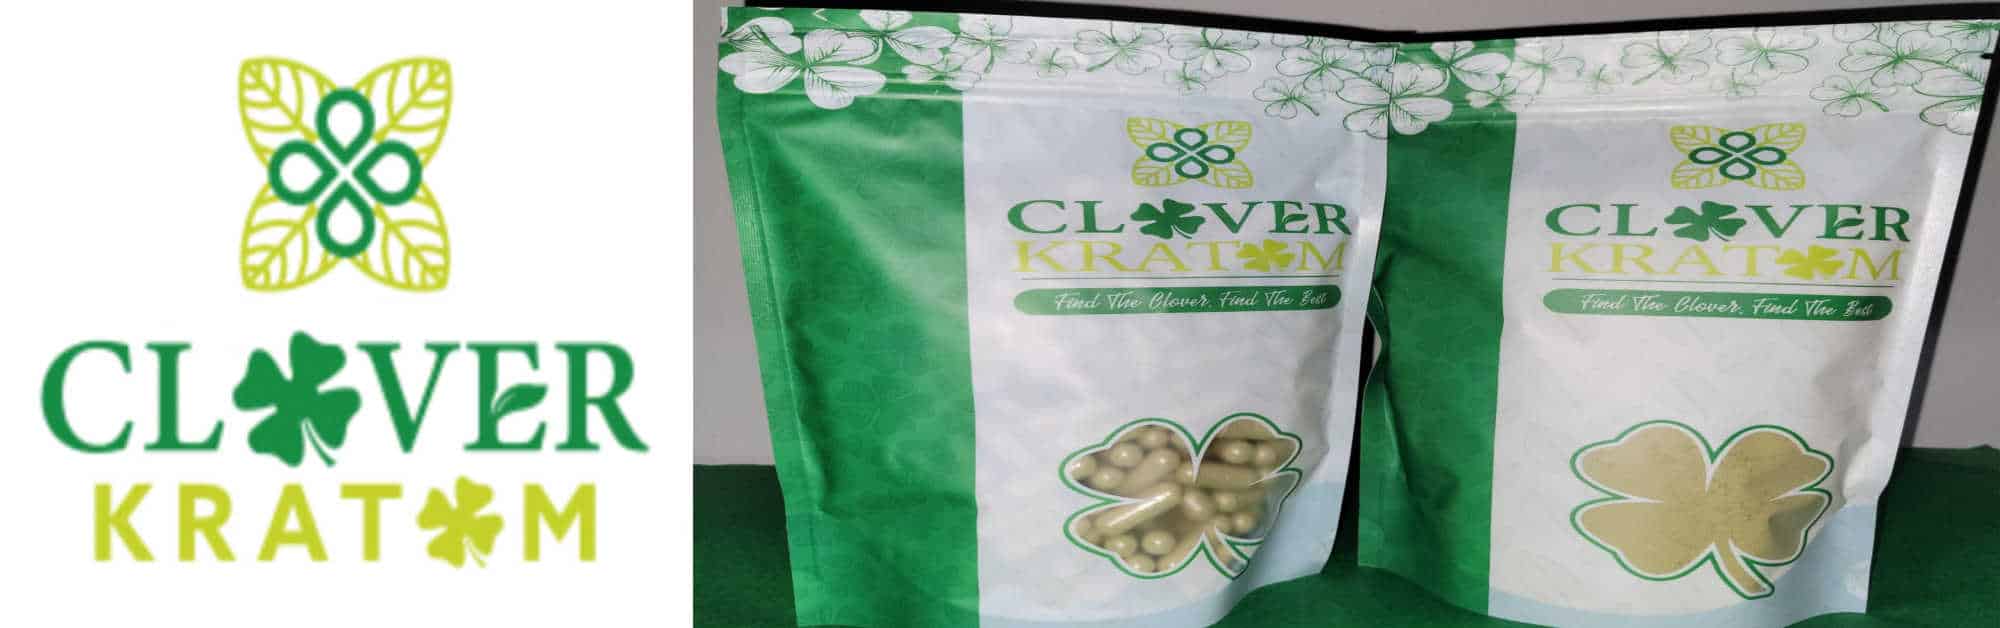 image of clover kratom product